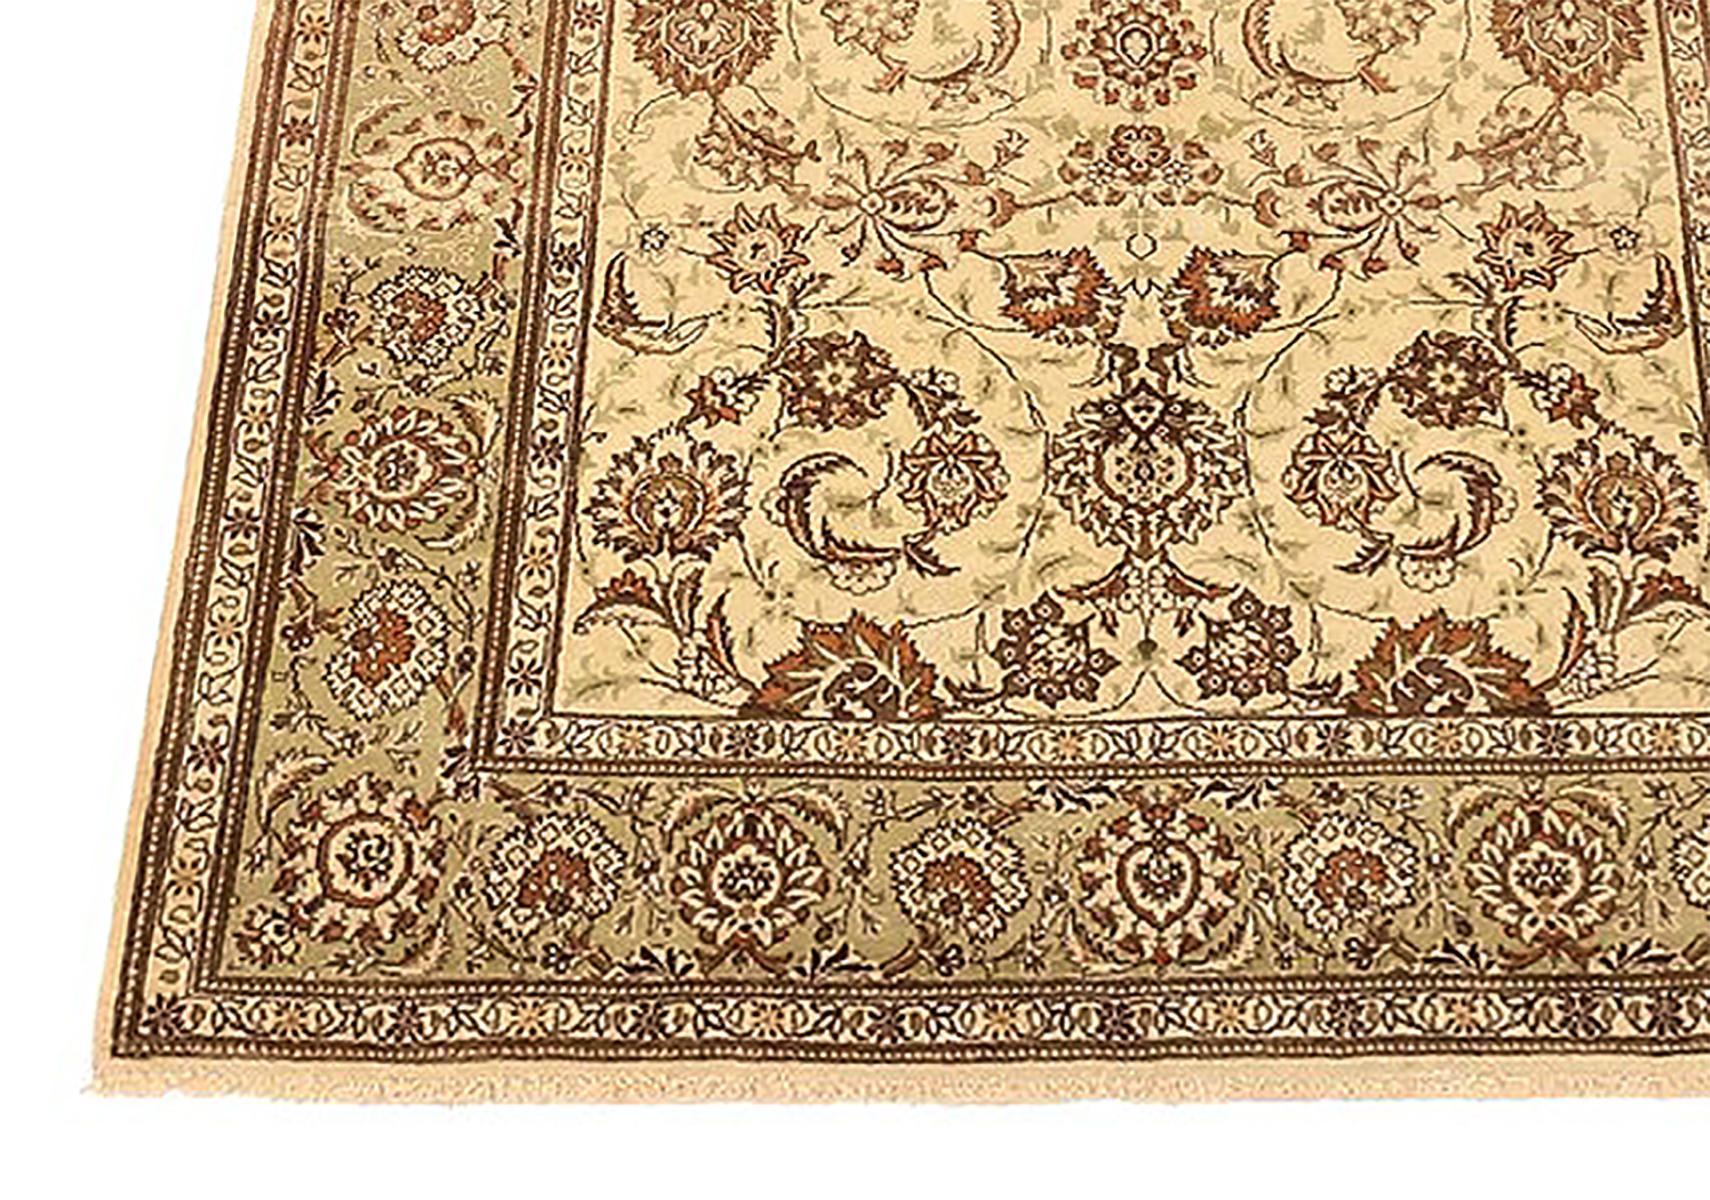 Antique Persian Kashan Rug with Brown and White Floral Details Over Ivory Field In Excellent Condition For Sale In Dallas, TX